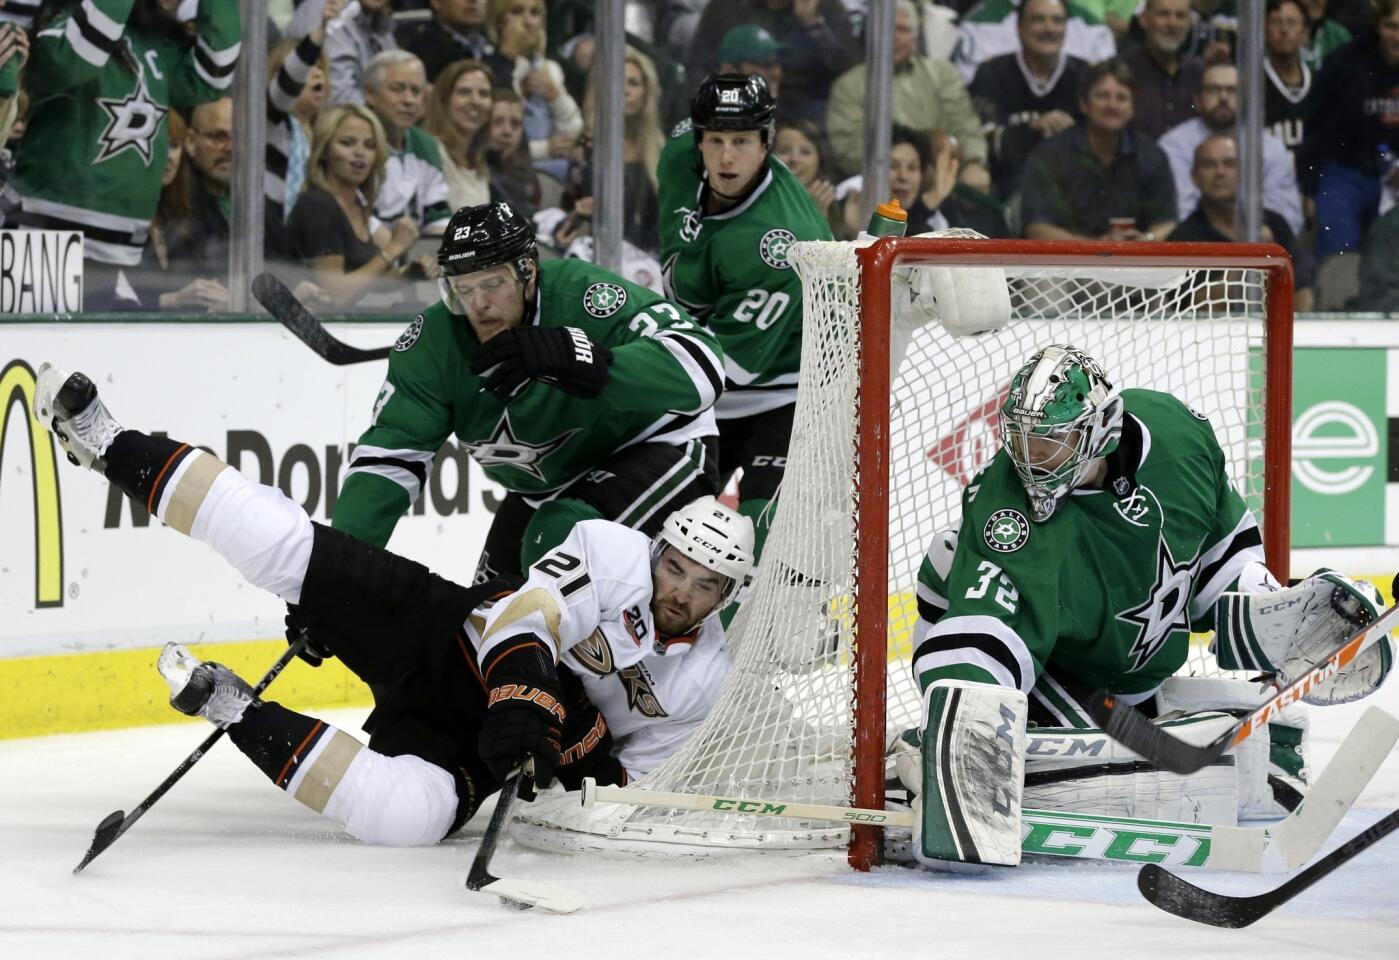 Ducks right wing Kyle Palmieri falls as he attempts a wrap-around shot in front of Dallas Stars defenseman Kevin Connauton and goalie Kari Lehtonen during the second period of the Ducks' 4-2 loss in Game 4 of the Western Conference quarterfinals.